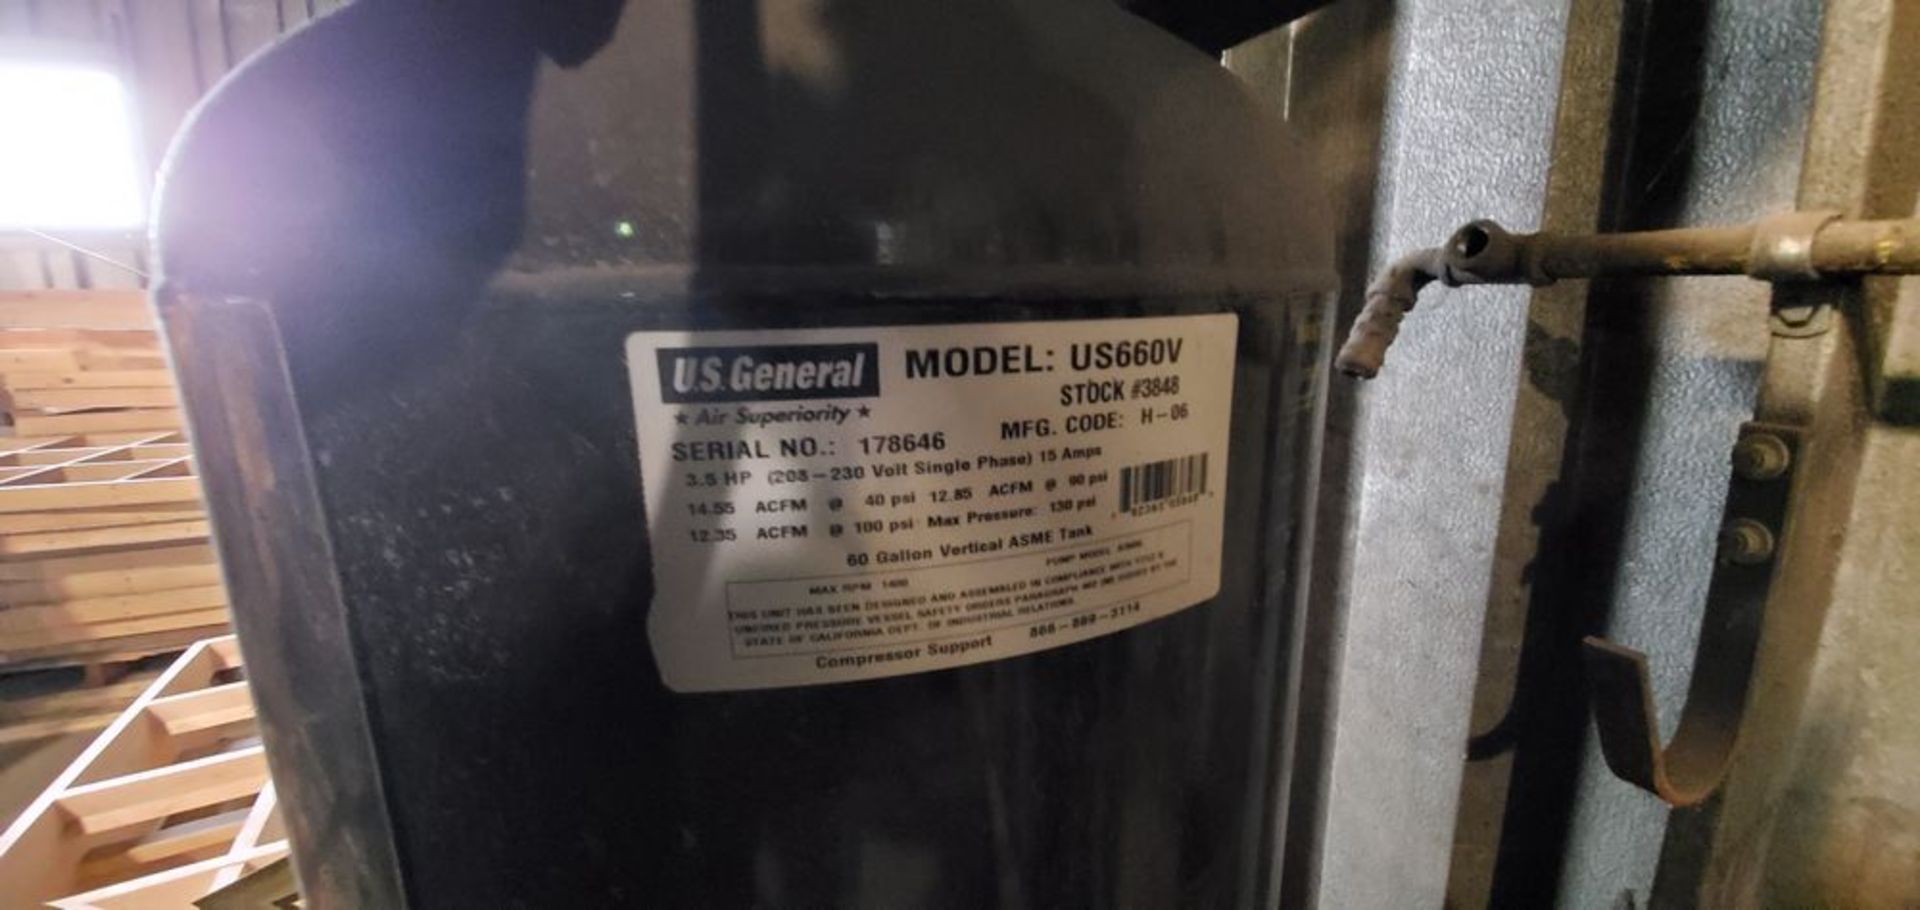 Located in Canon City, CO -- Lot: 2 US General US660V Air Compressor 3.5hp 12.35 acfm at 100psi - Image 4 of 4